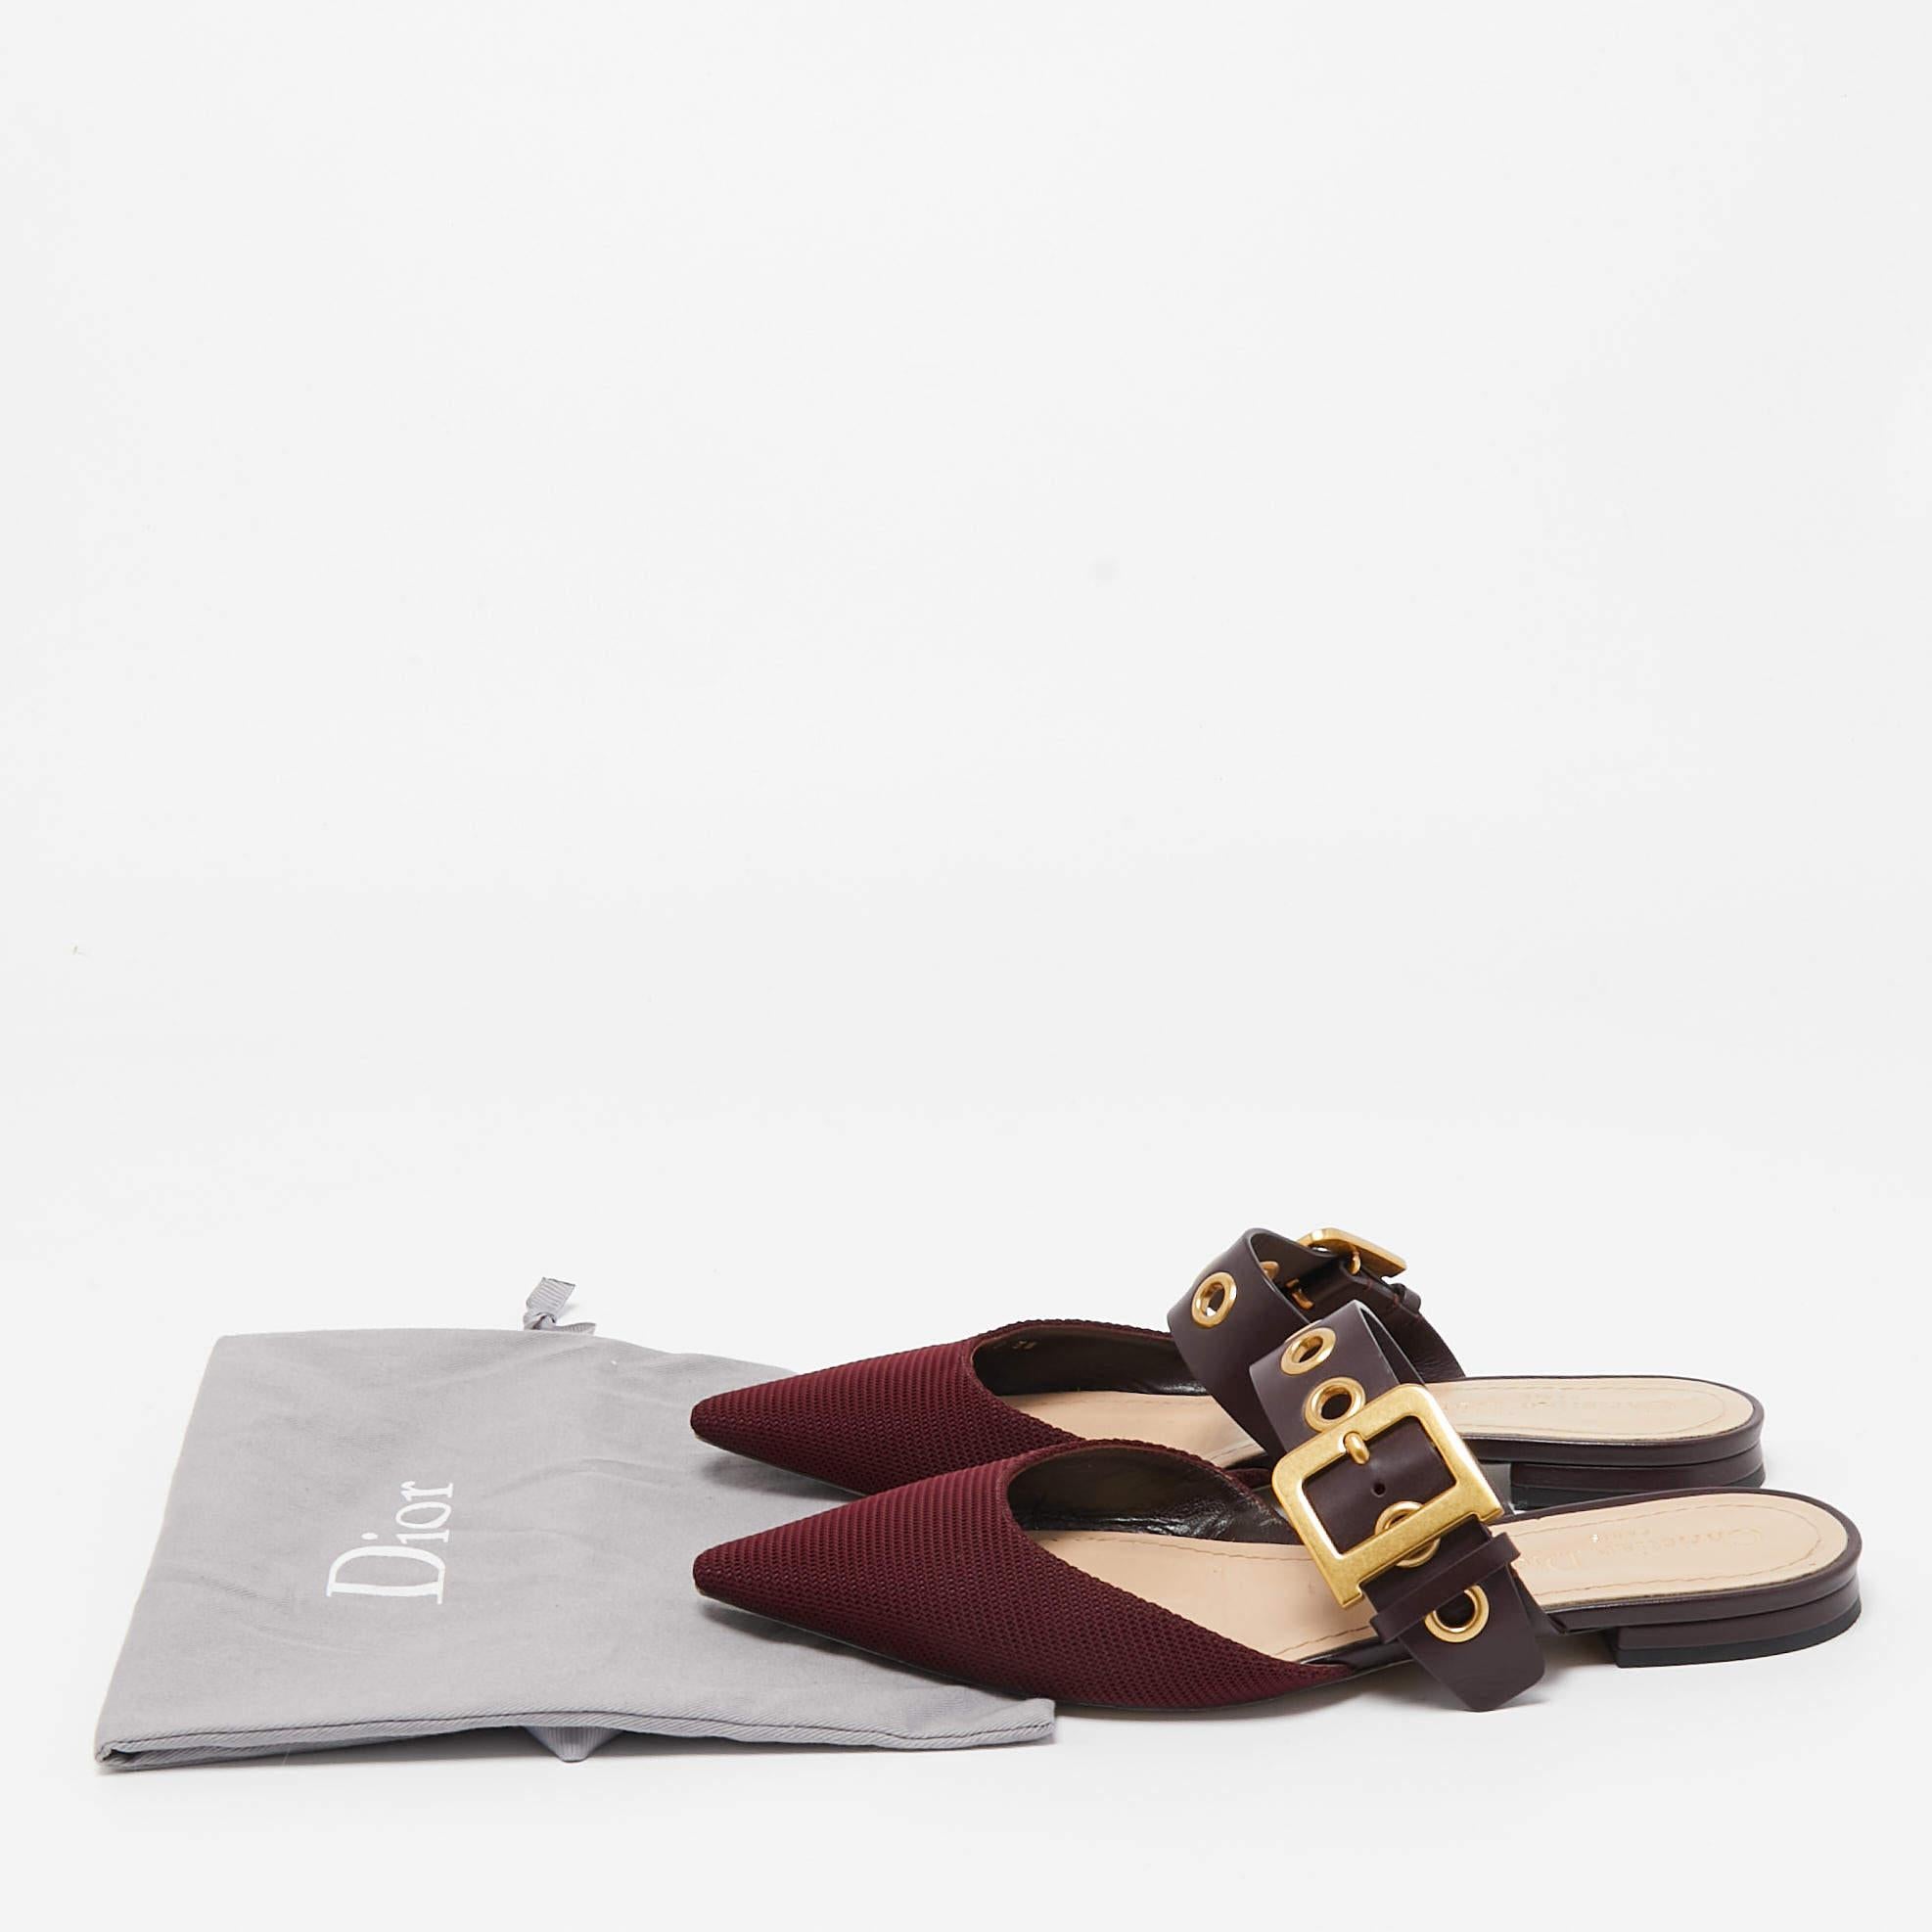 Dior Burgundy Canvas and Leather D-Dior Slide Mules Size 38 5